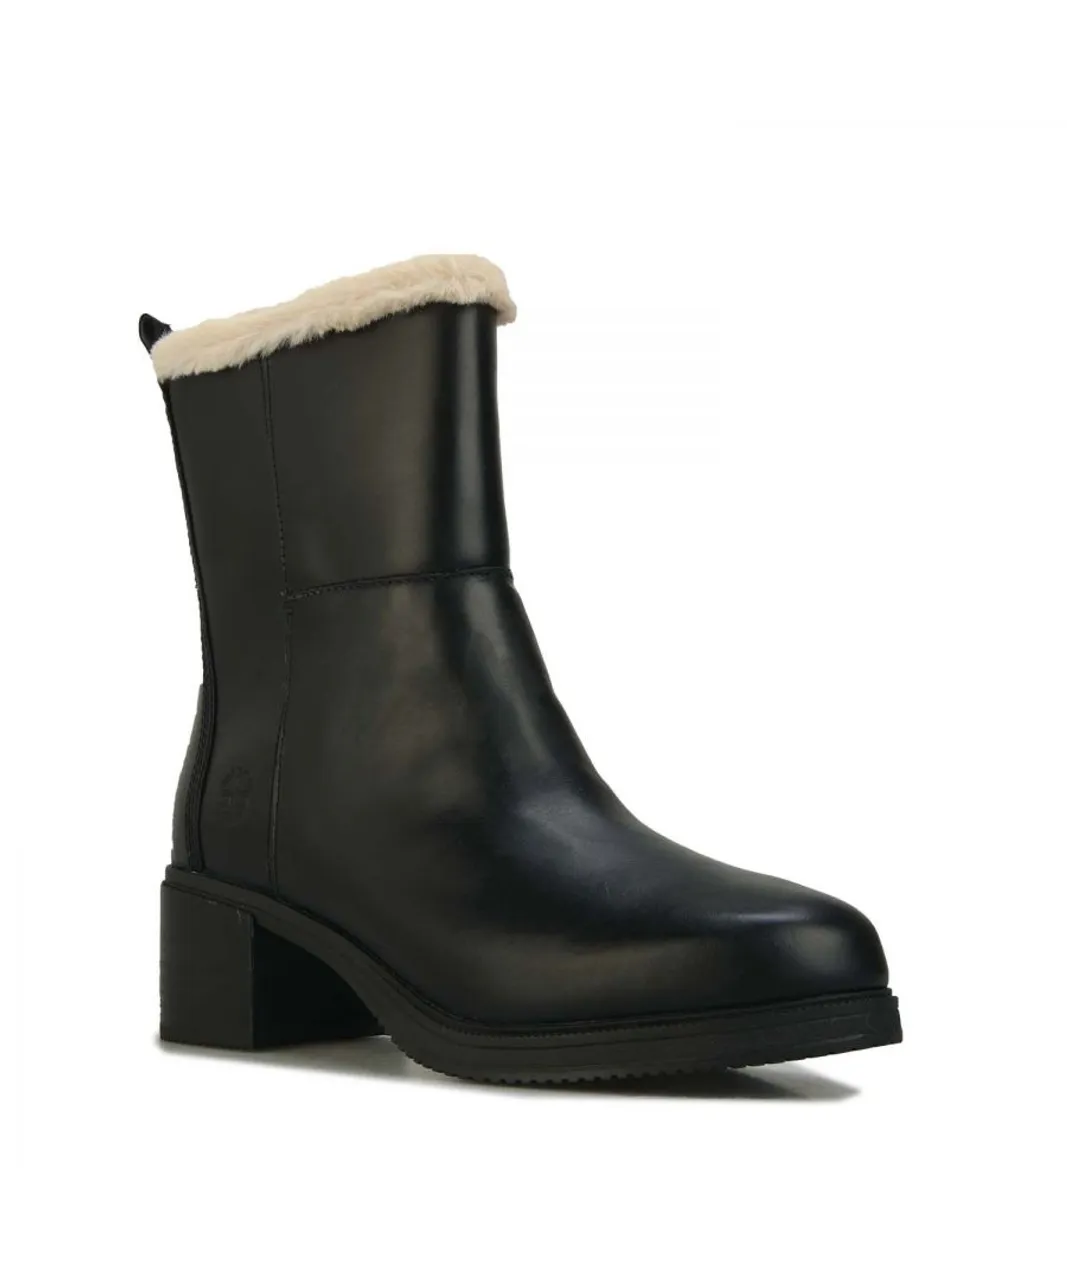 Timberland Womenss Dalston Vibe Warmlined Boot in Black Leather (archived)